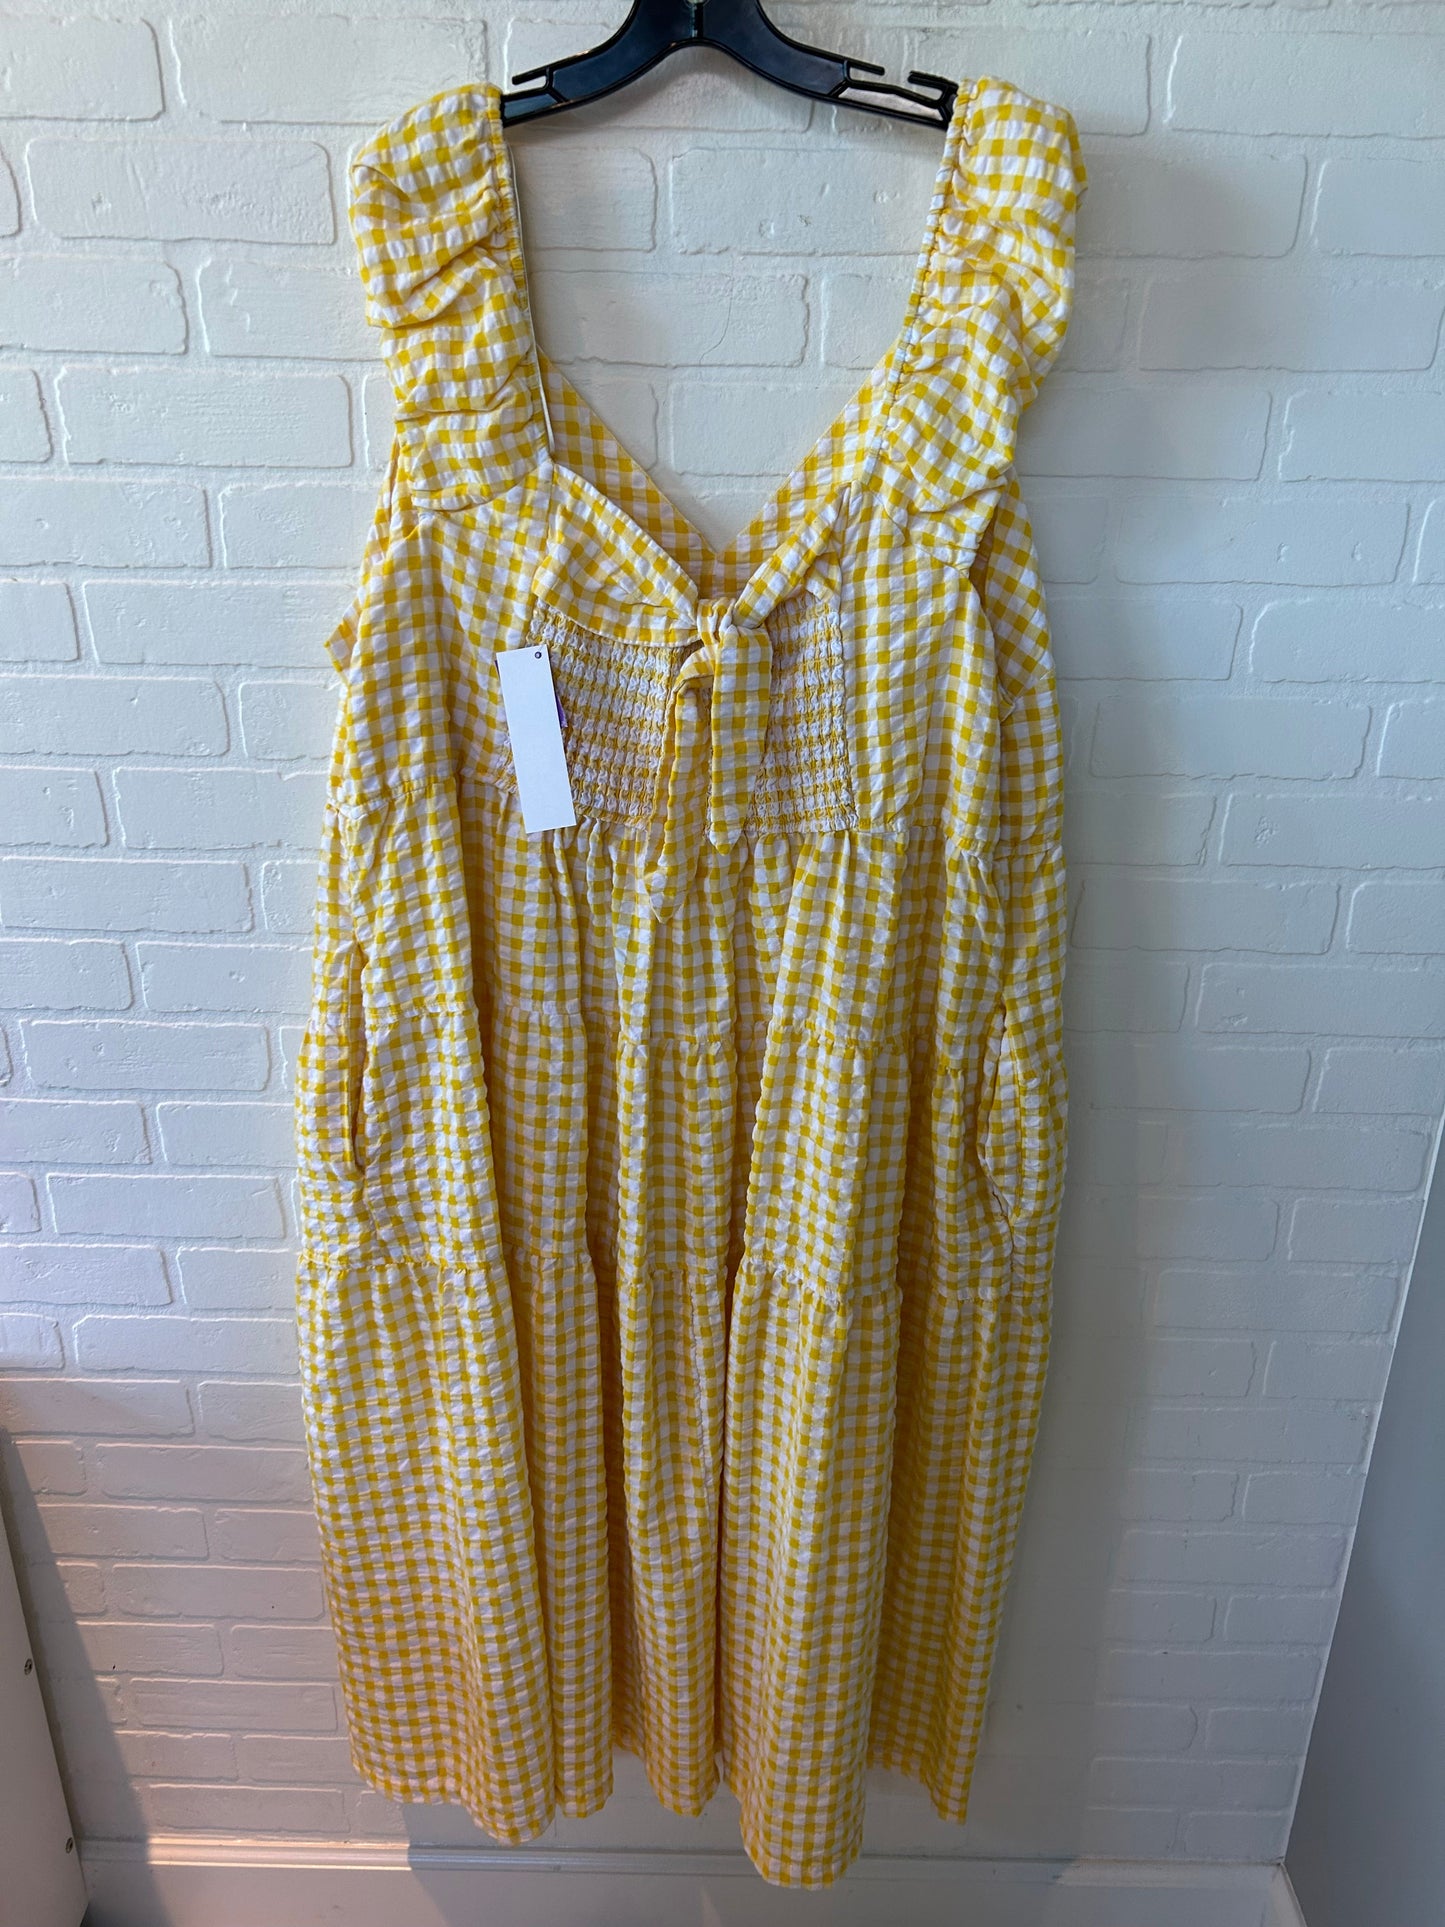 White & Yellow Dress Casual Maxi Old Navy, Size 4x